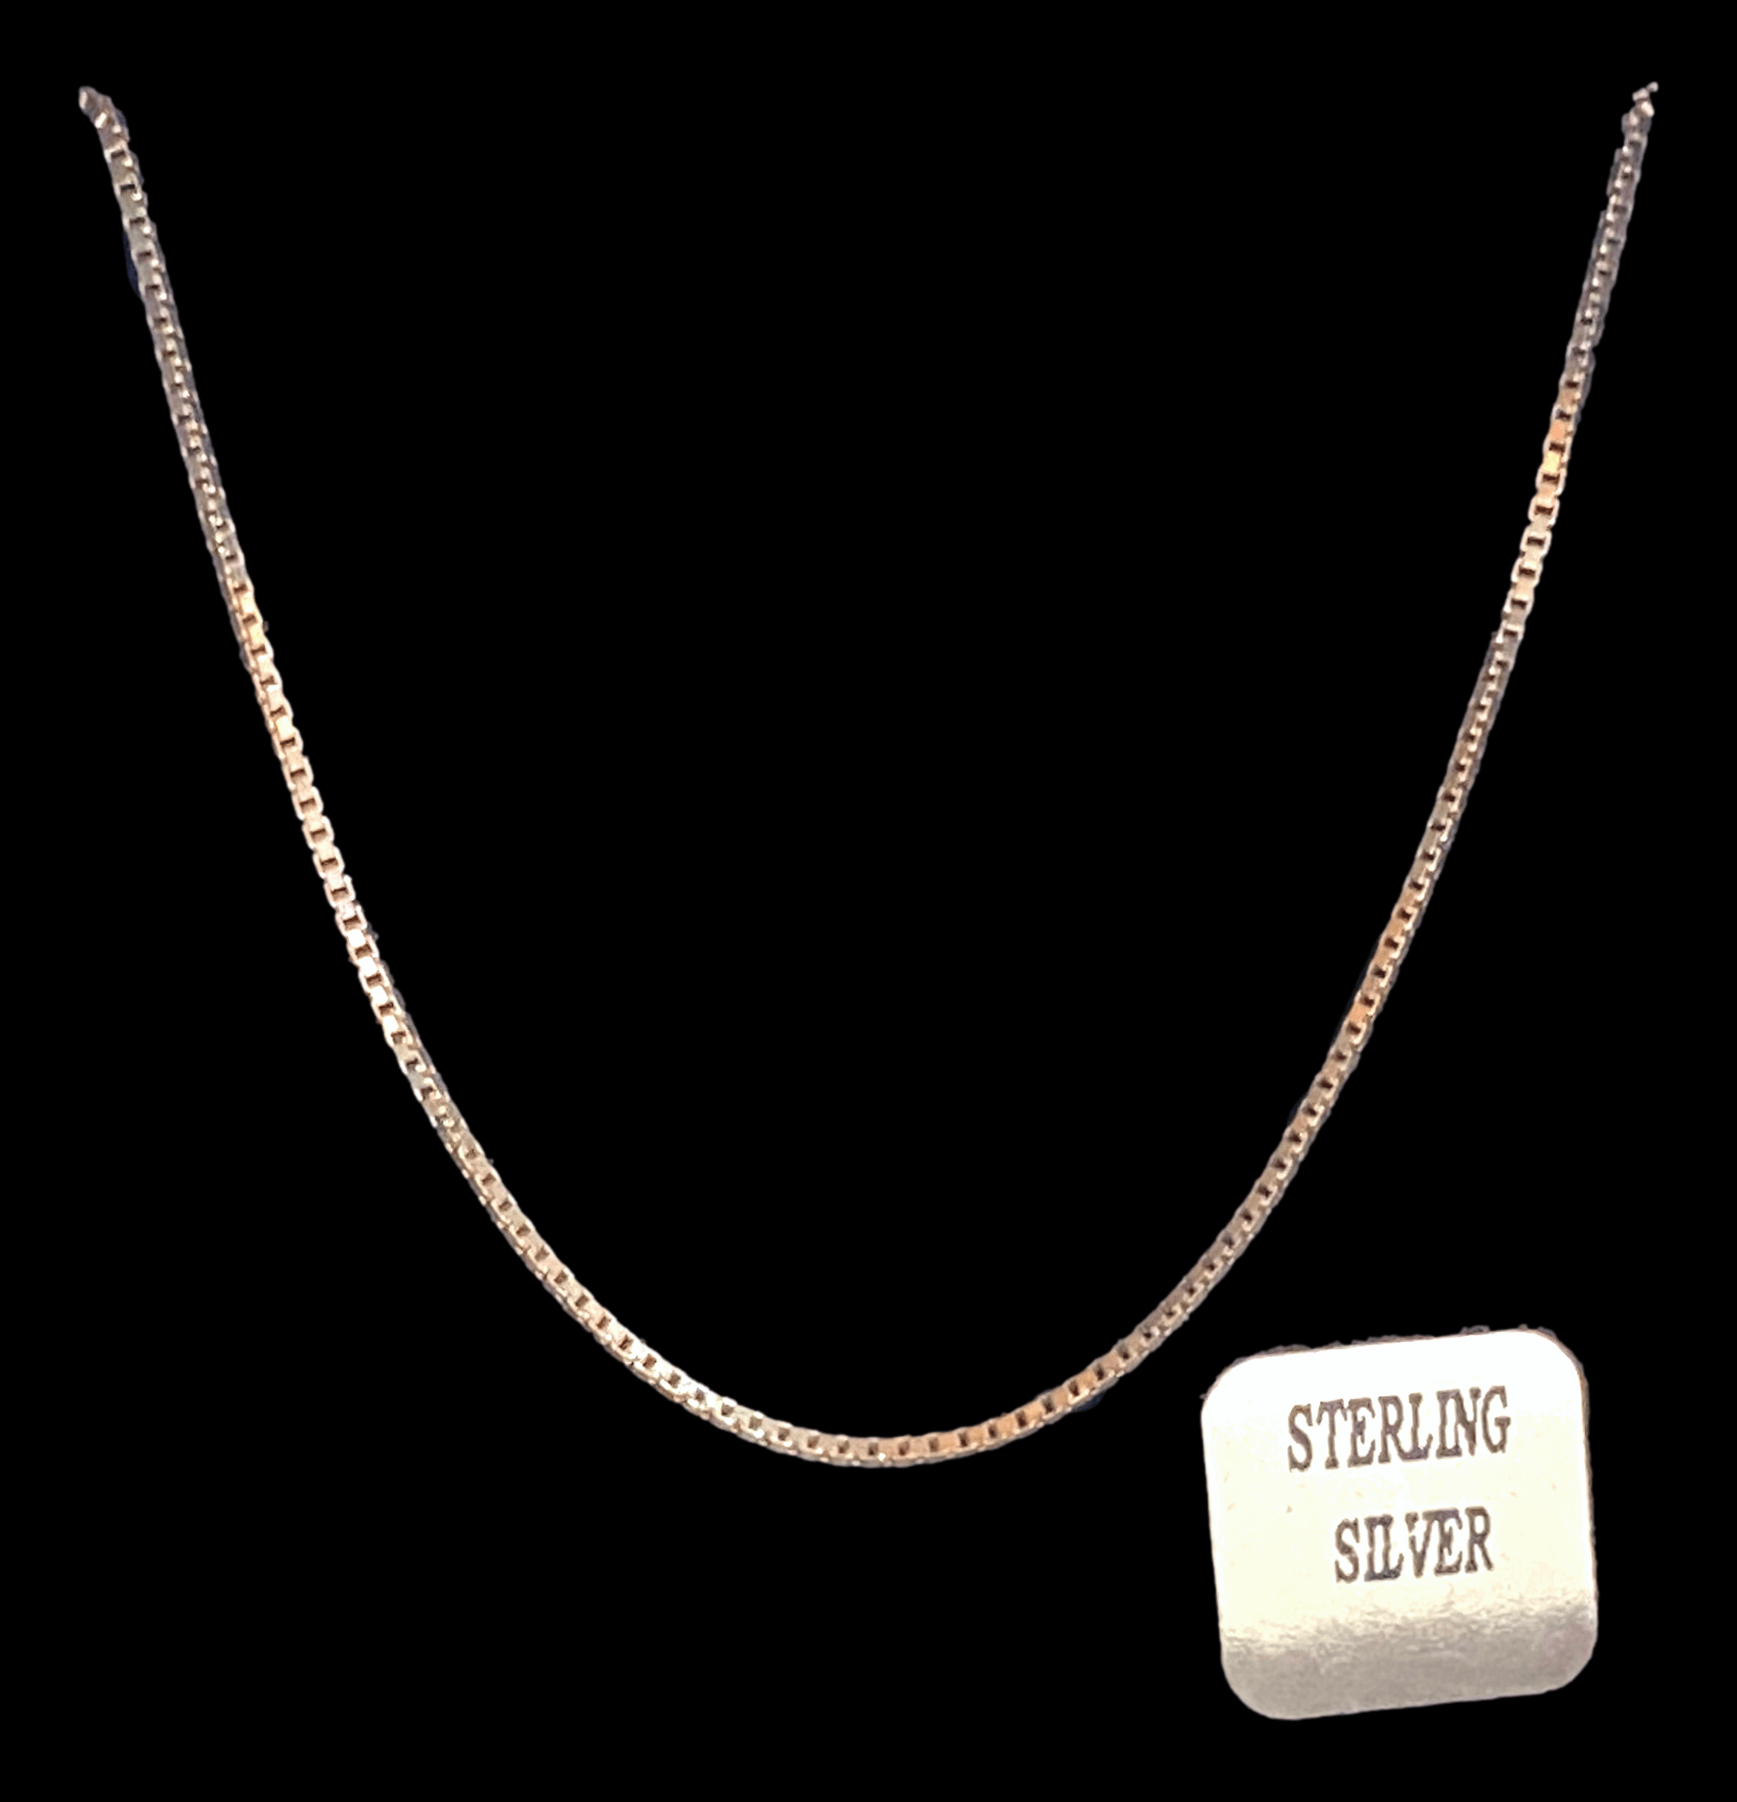 Necklace Sterling Silver .925 Thin Chain 9 L inches - Ysleta Mission Gift Shop- VOTED El Paso's Best Gift Shop